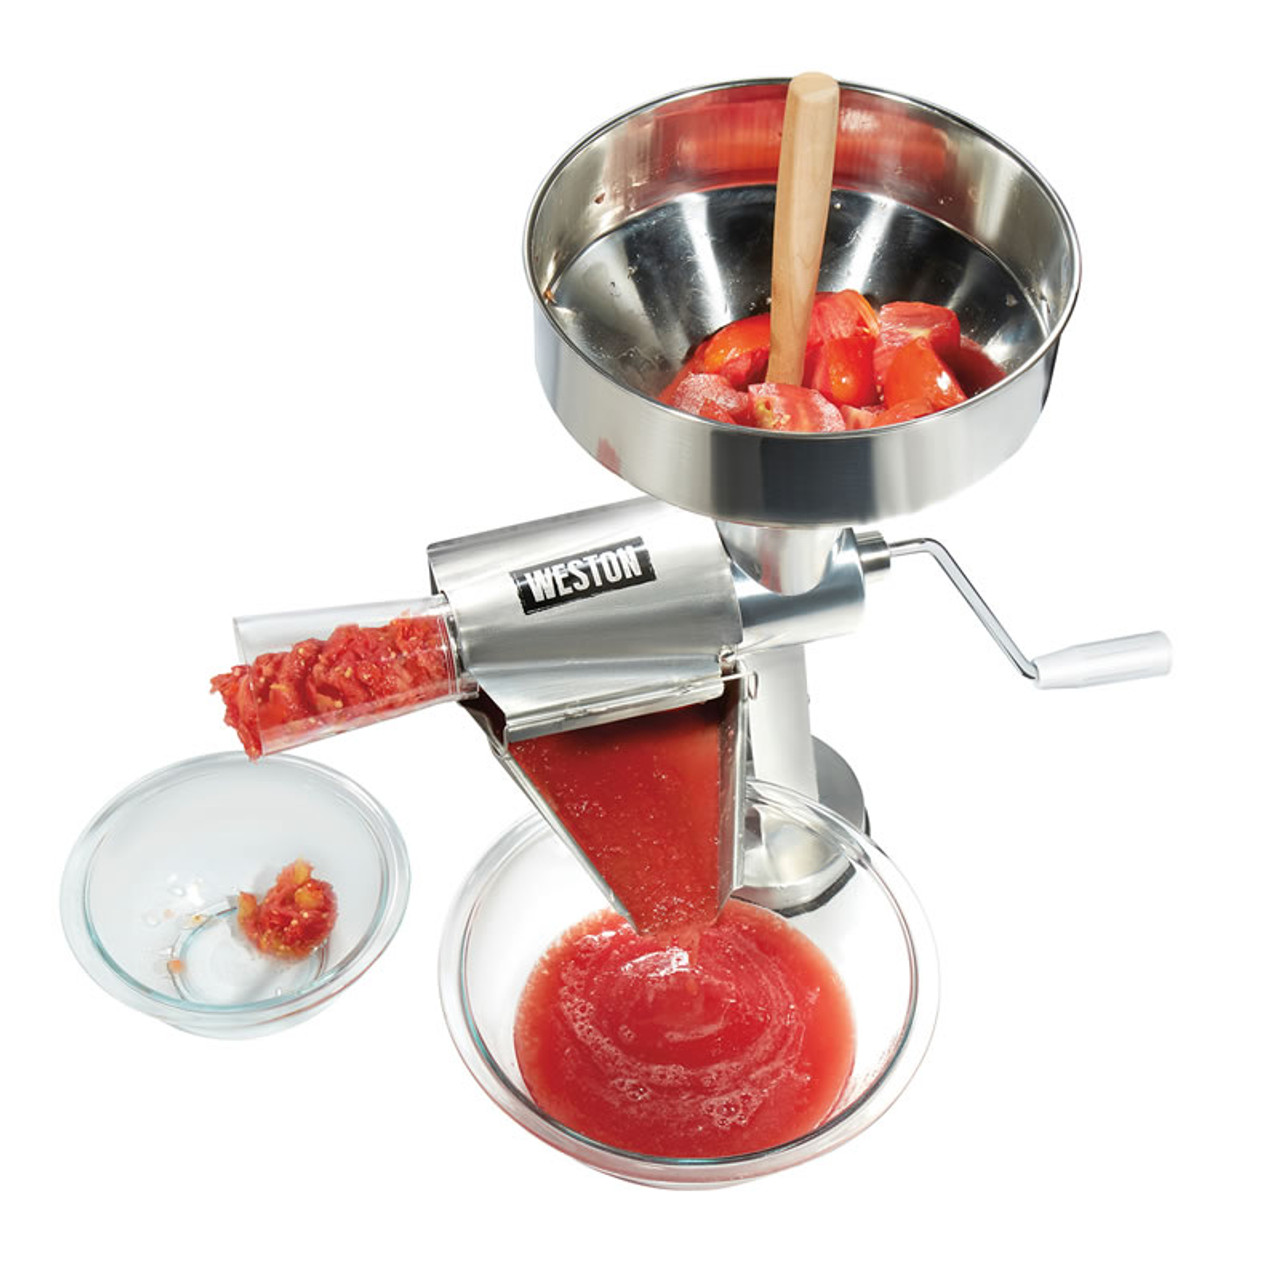 Weston 07-0801 Sauce Maker and Tomato Strainer, 1 gal Capacity, Stainless Steel, Red/White